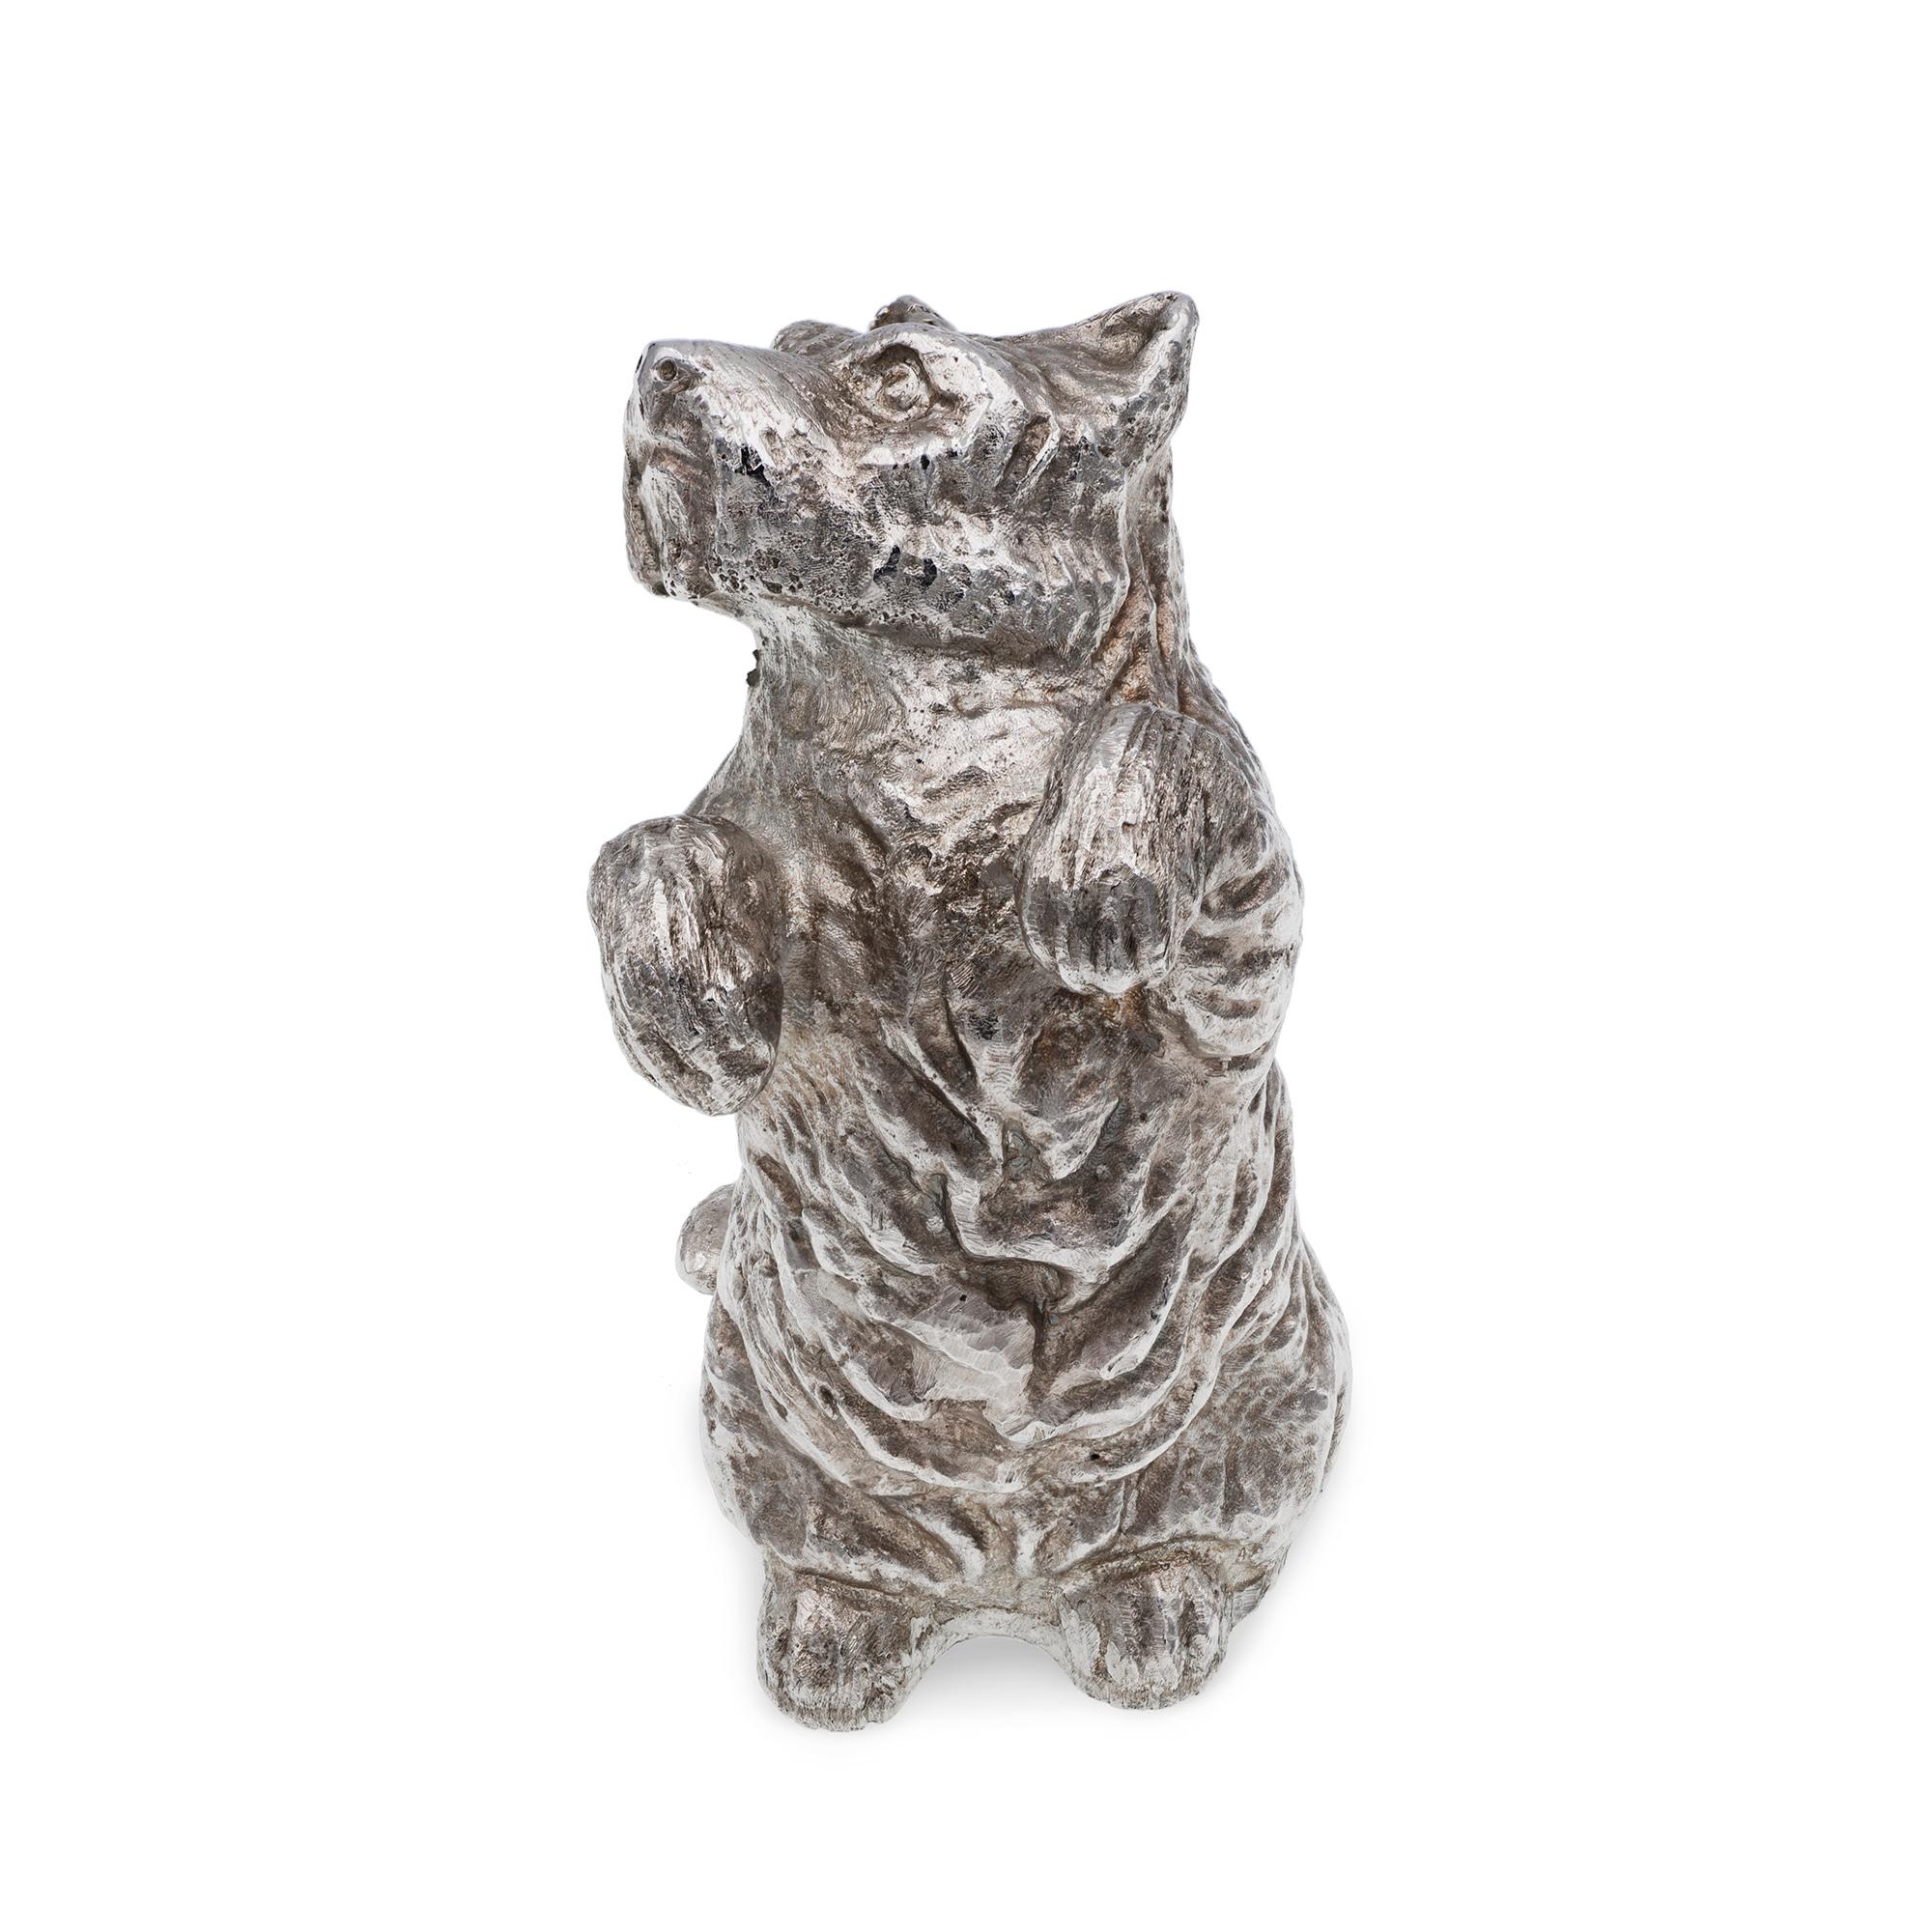 A cast sterling silver dog model, height 6cms, weight 107.8gms, hallmarked London, bearing the Bentley & Skinner sponsor mark. 

Should you choose to make this purchase we will delighted to send it to you beautifully gift-wrapped in a Bentley &